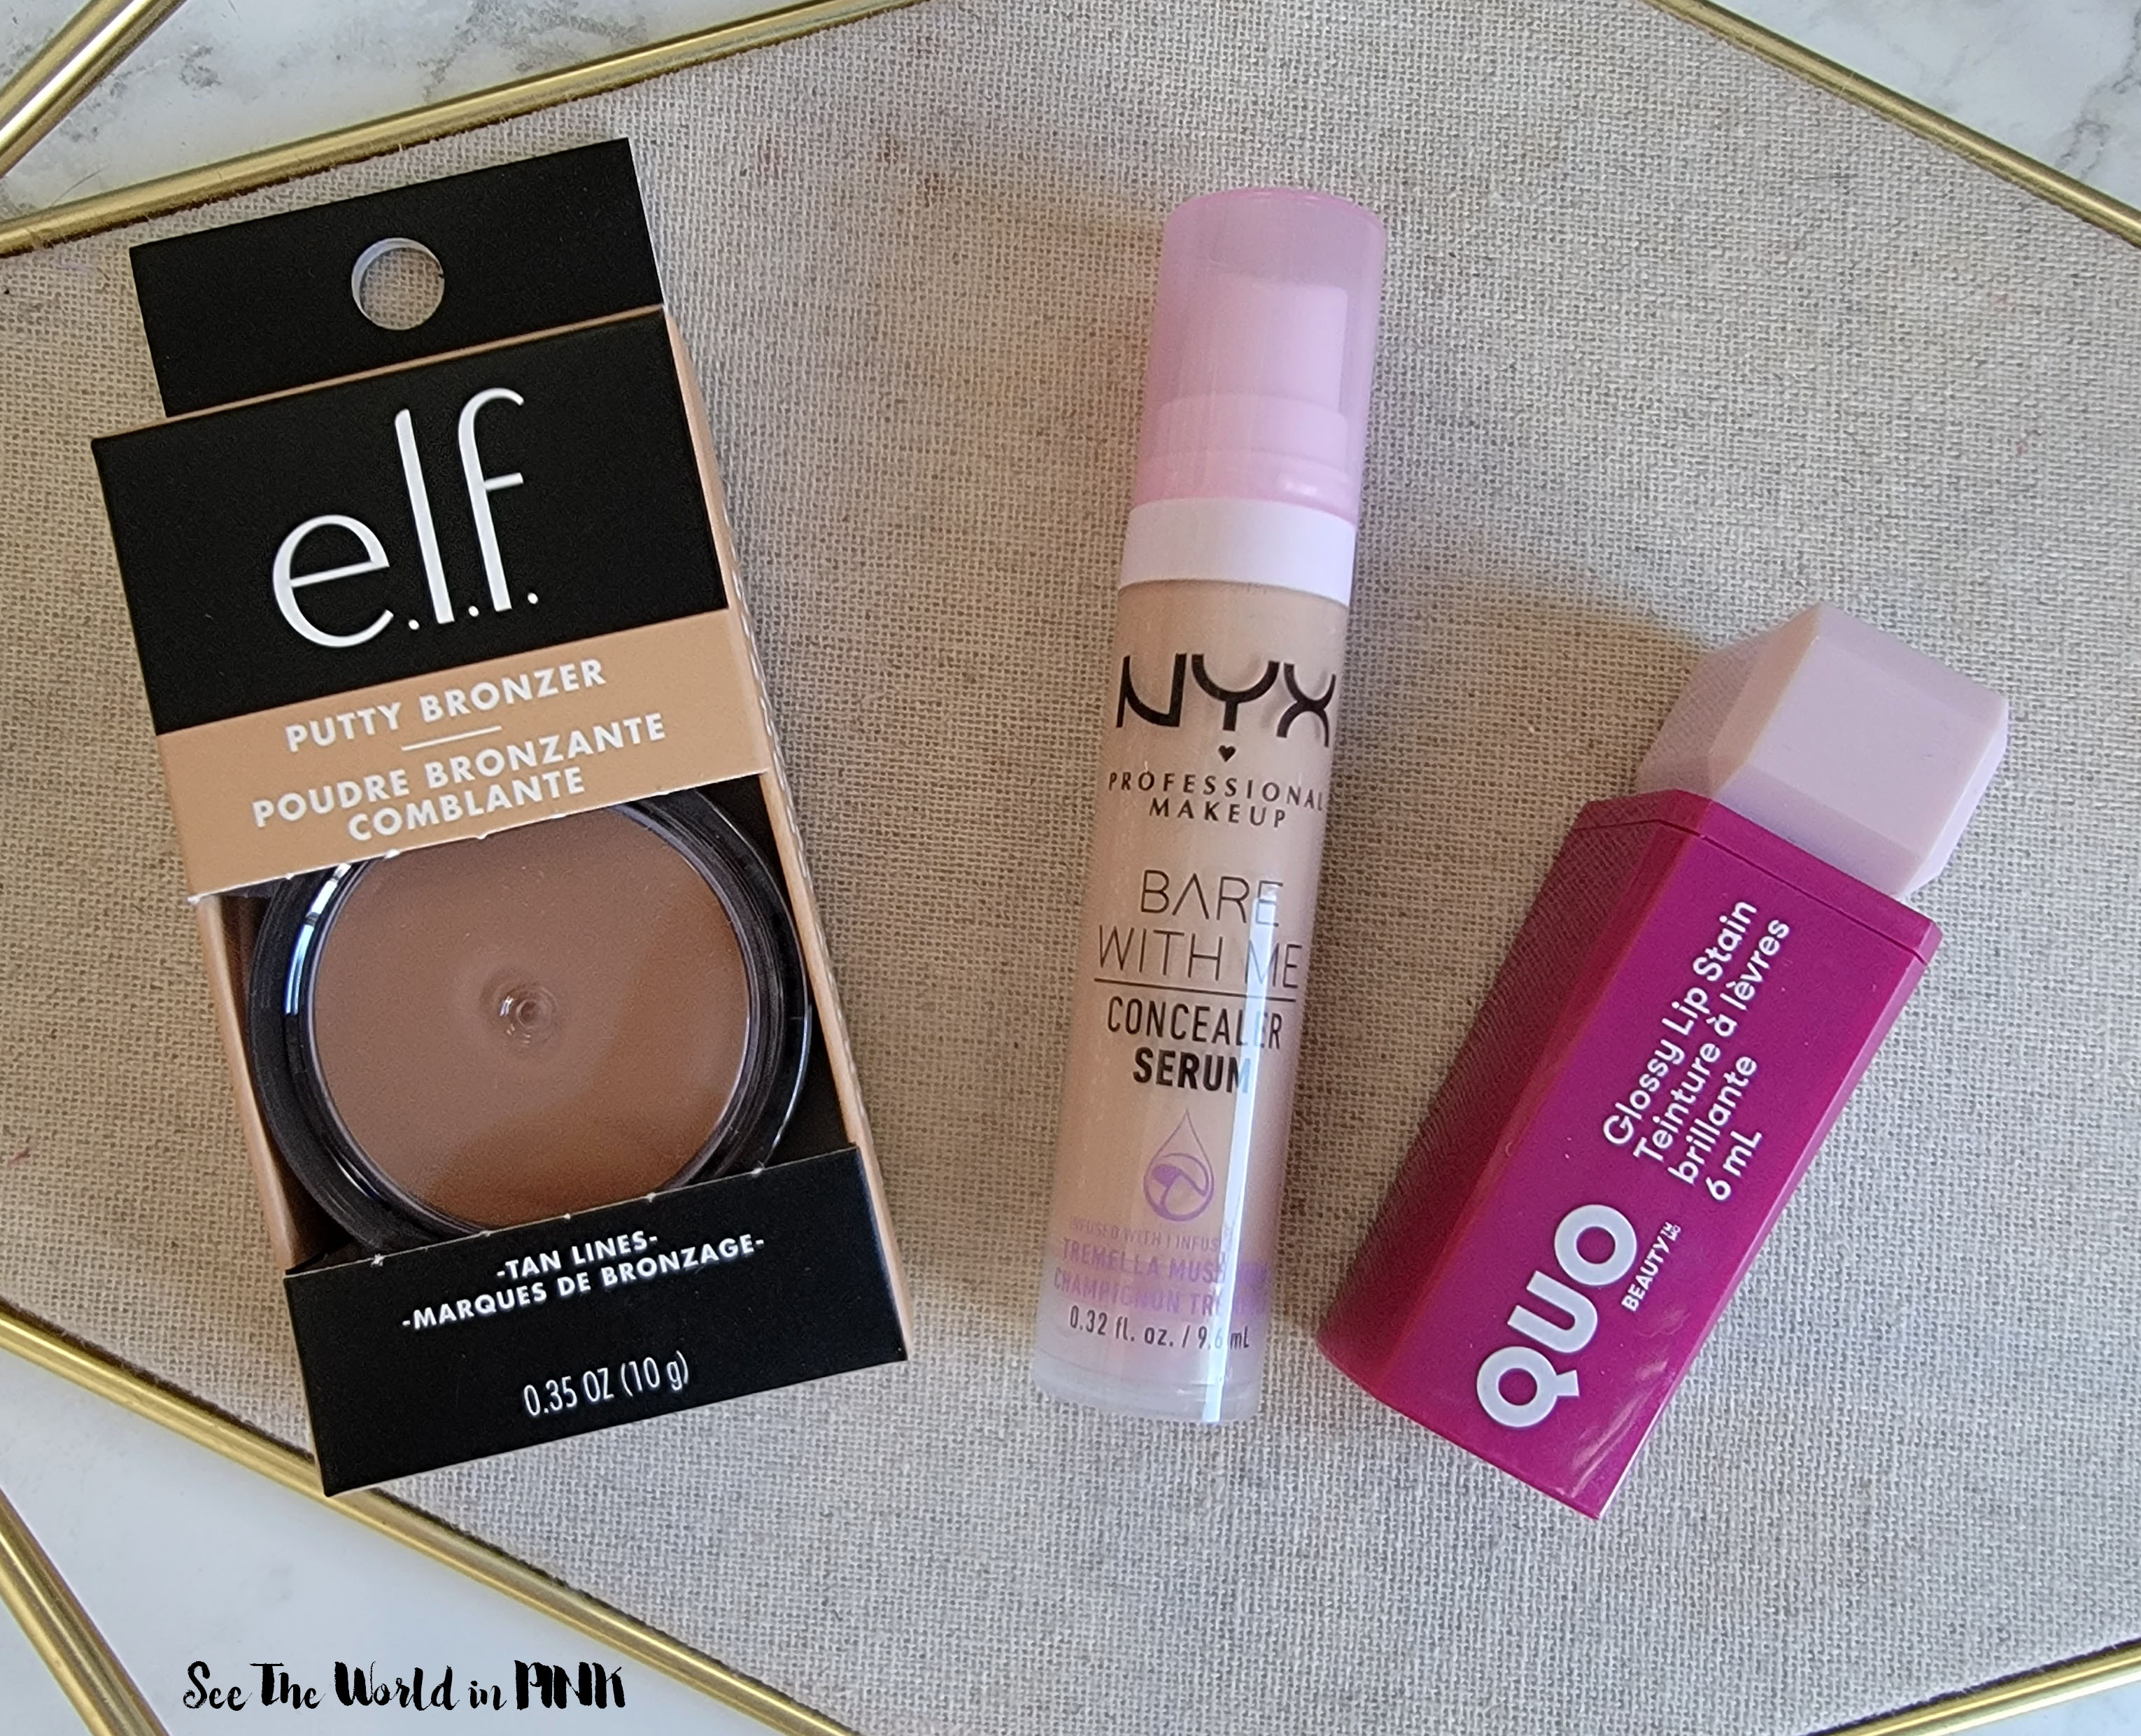 Newish Drugstore Products That Didn't Work For Me